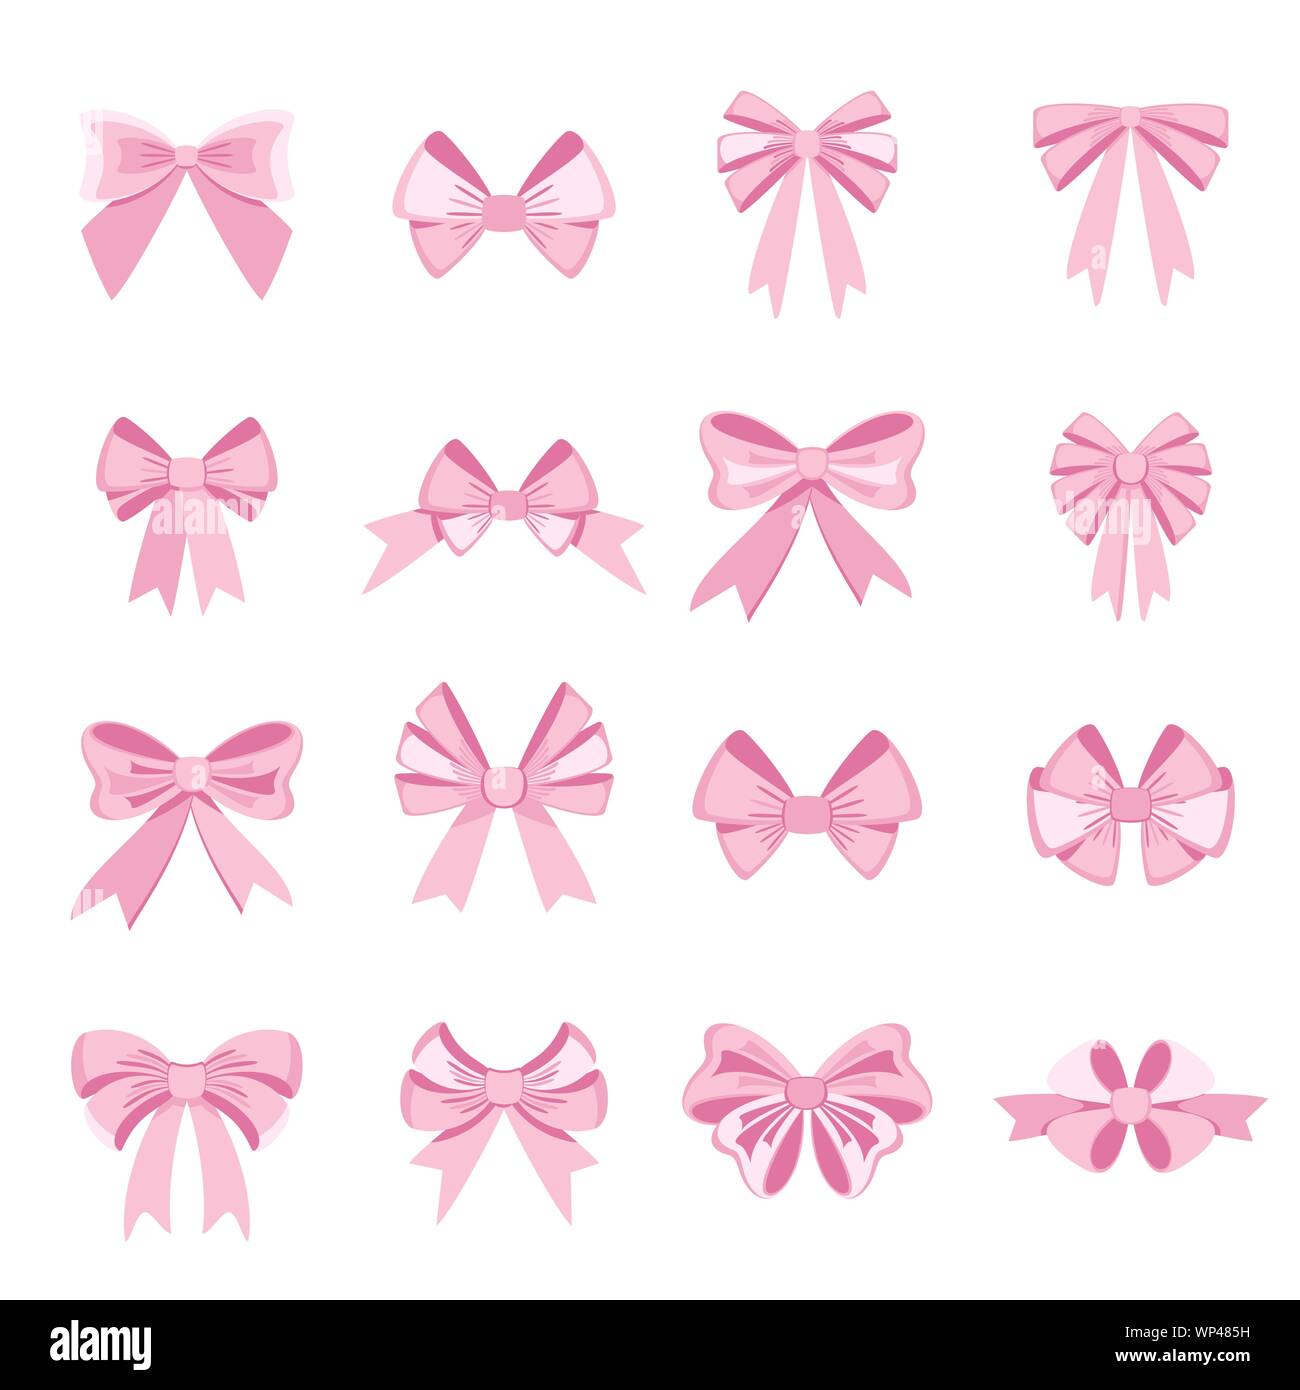 Elegant pink bows from a wide ribbon. Decor for greeting cards